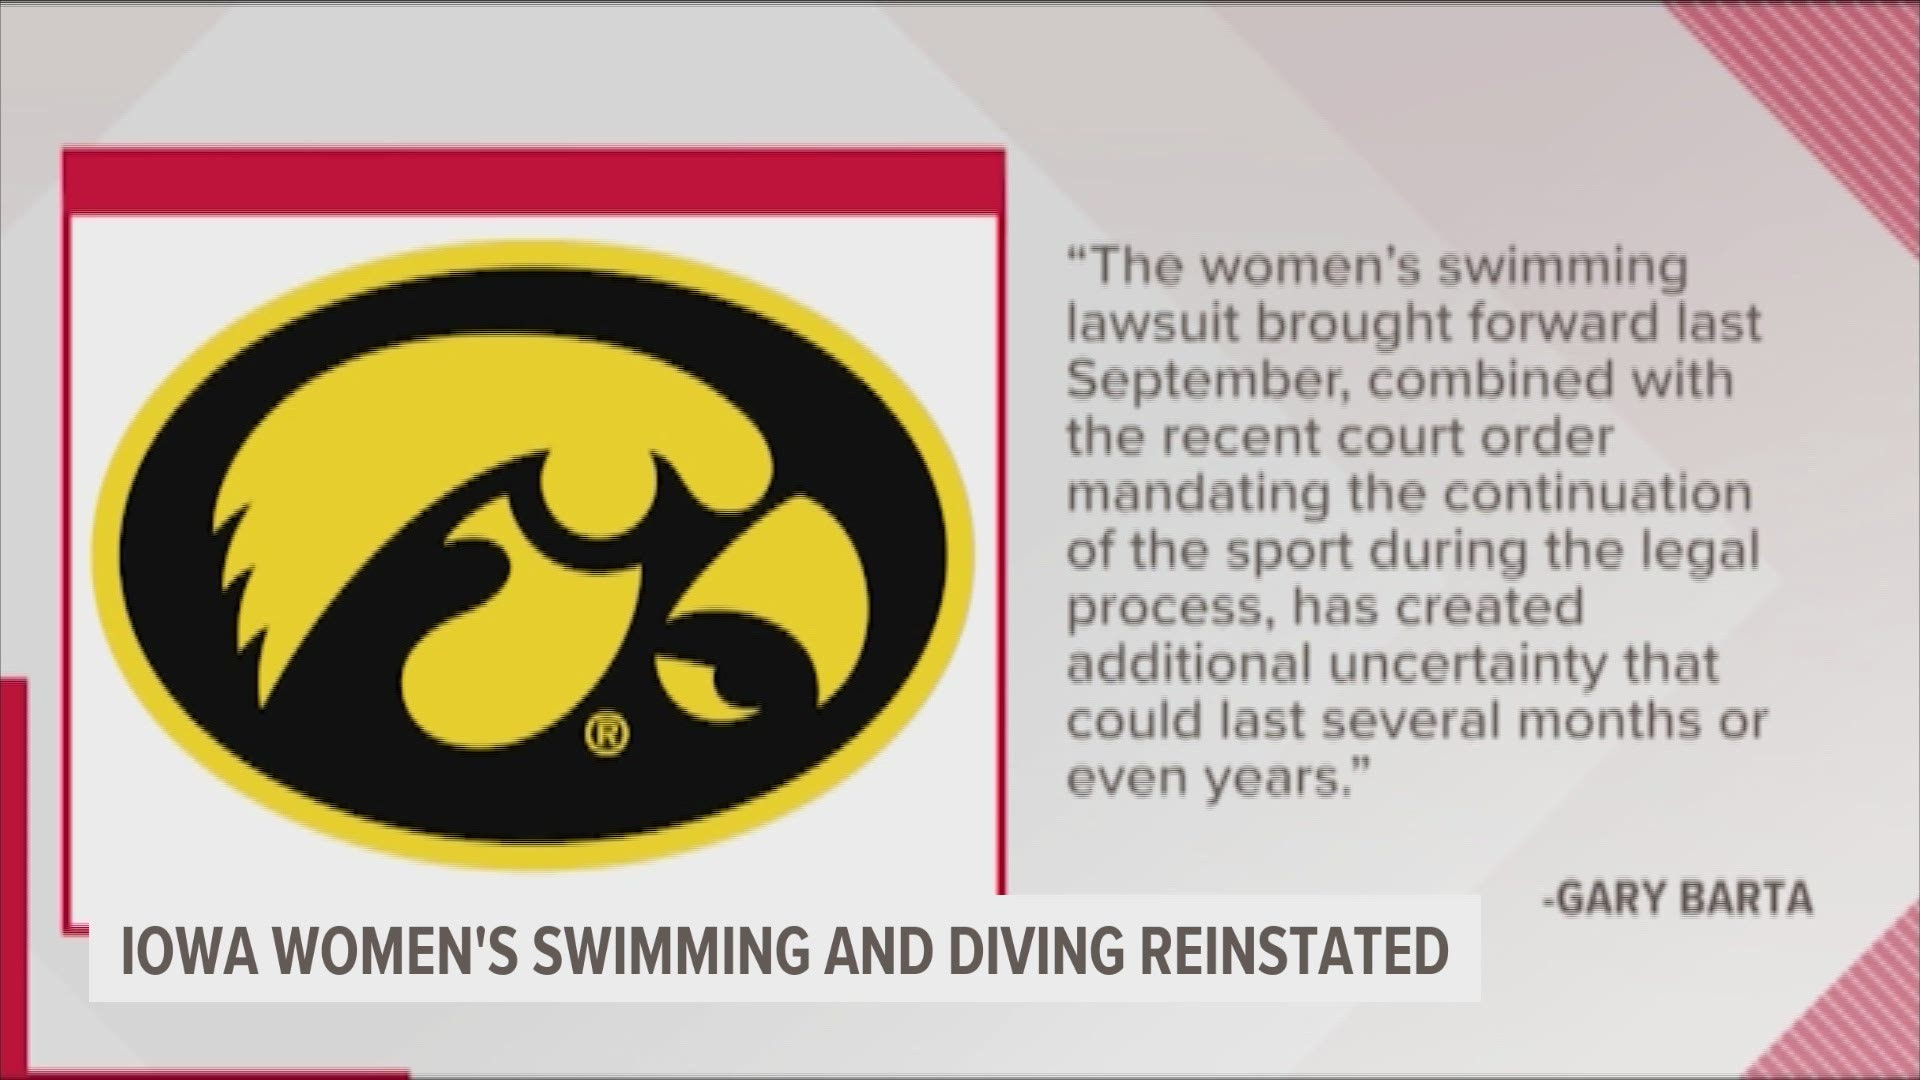 School officials announced in August they were dropping men’s and women’s swimming and diving, men’s gymnastics and men’s tennis at the end of their 2020-21 seasons.